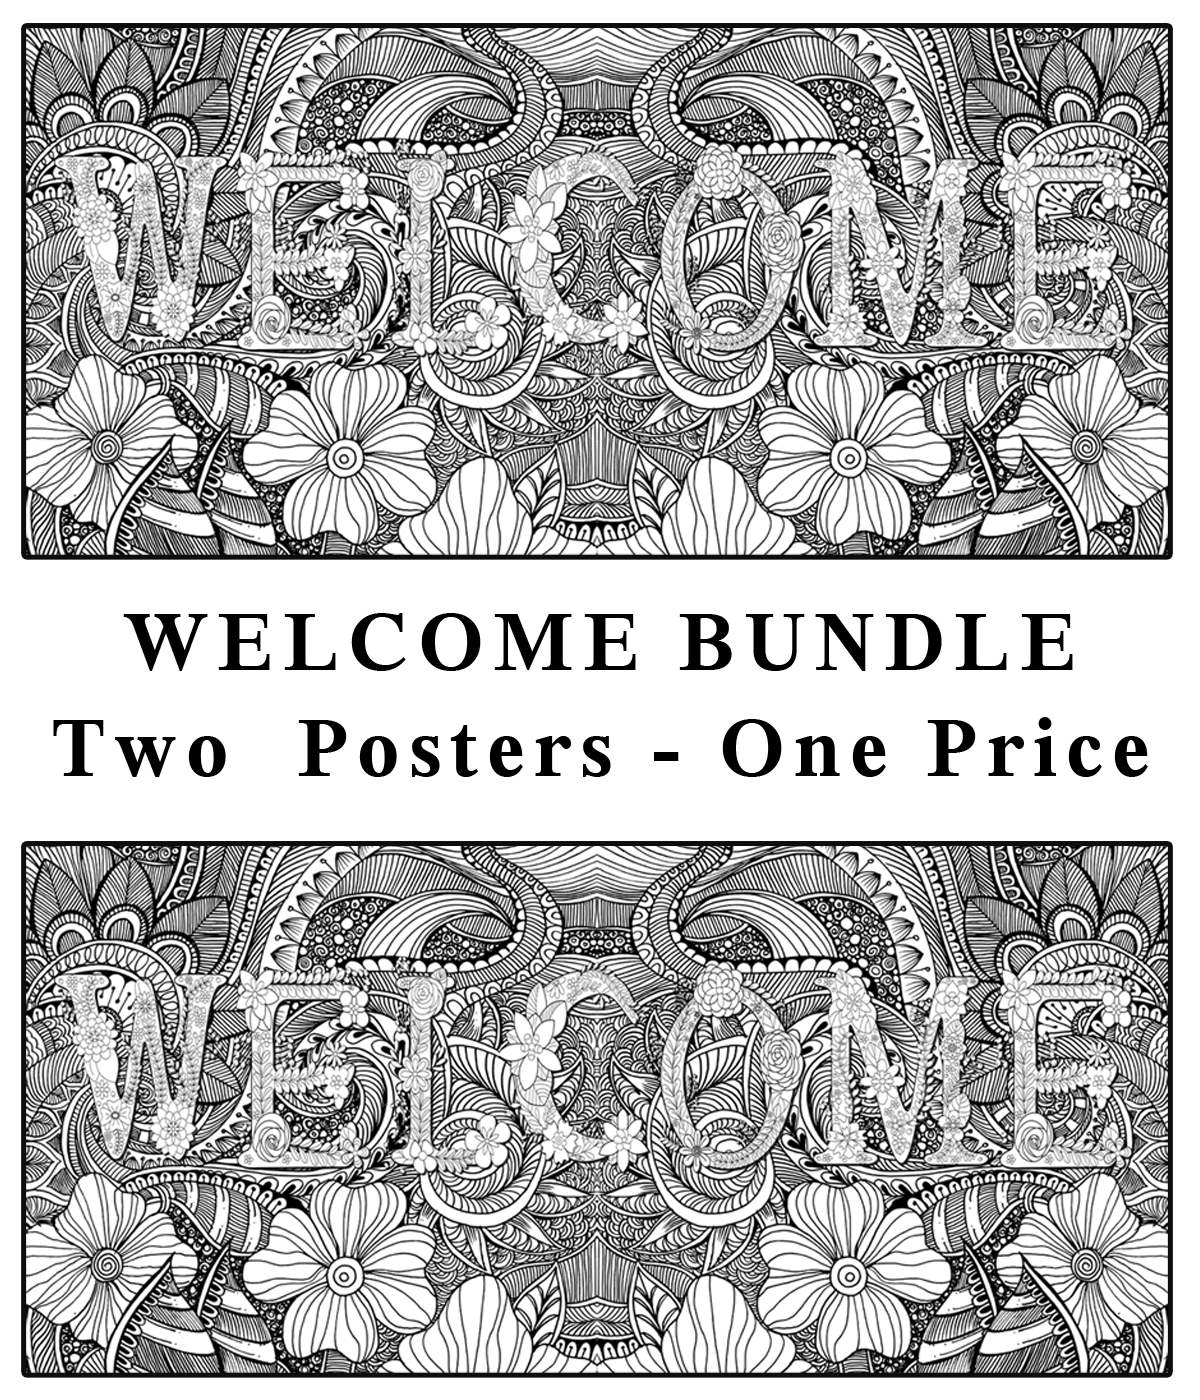 Welcome - Bundle of 2 Posters for $50 - SJPrinter 